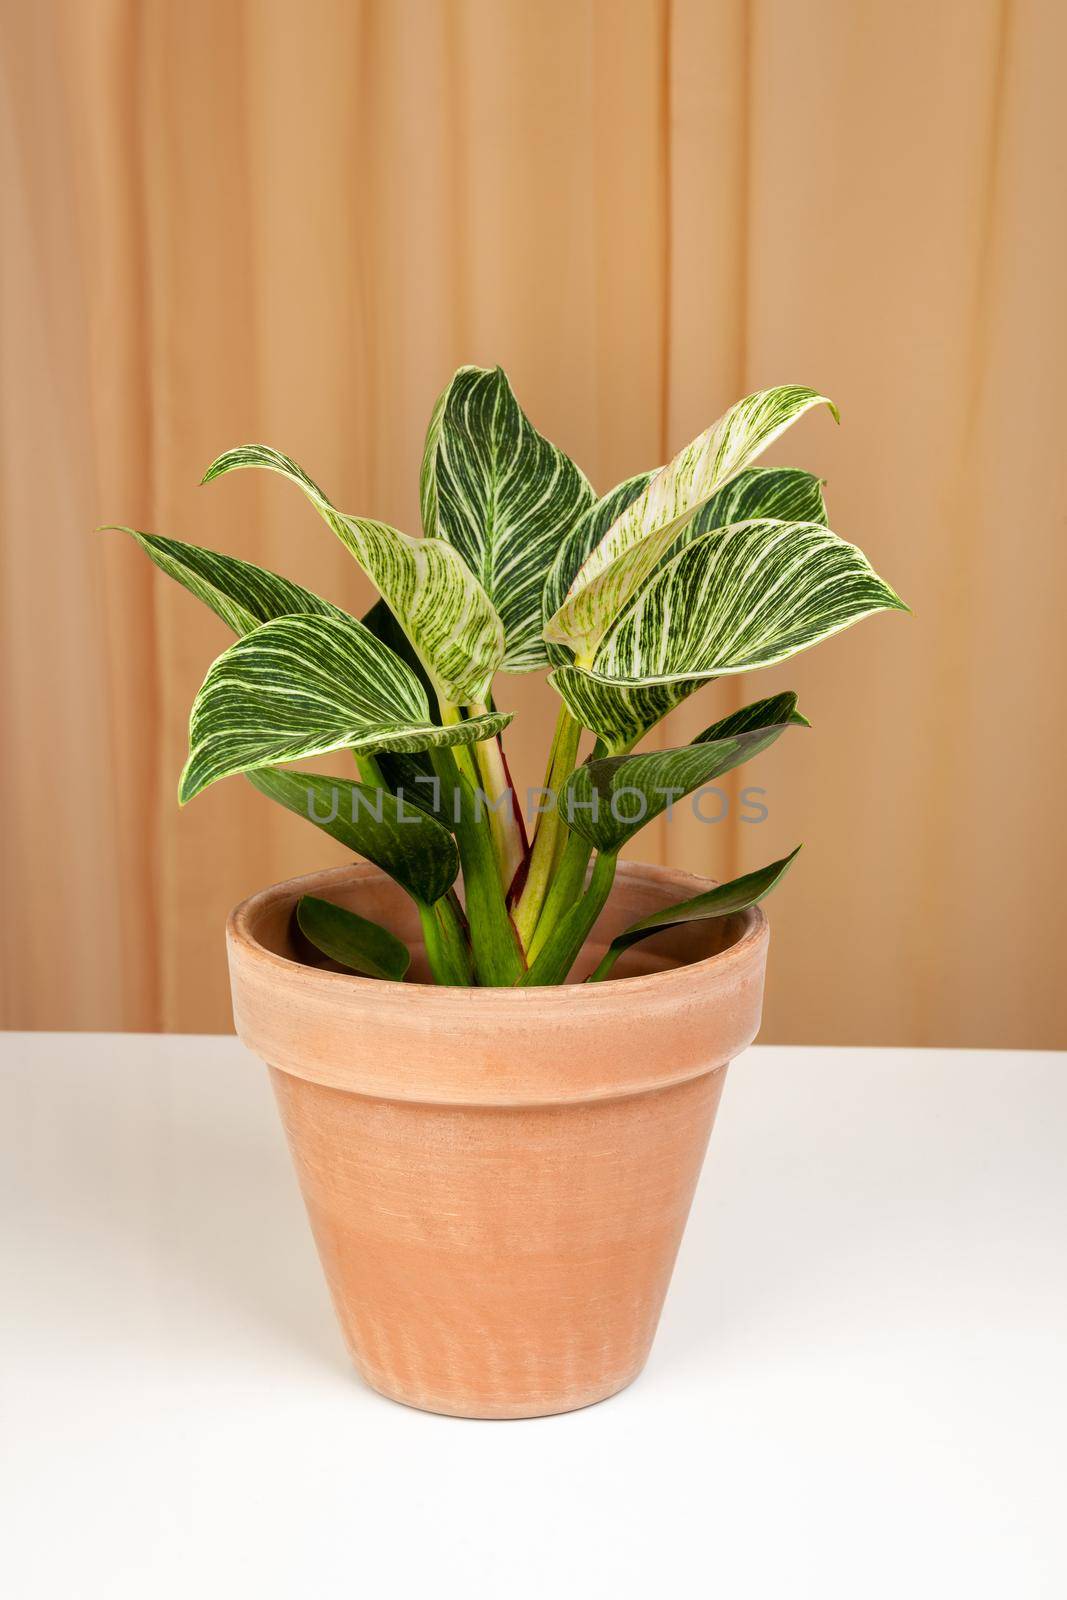 Philodendron Birkin house plant in brown ceramic pot on a fabric curtains background